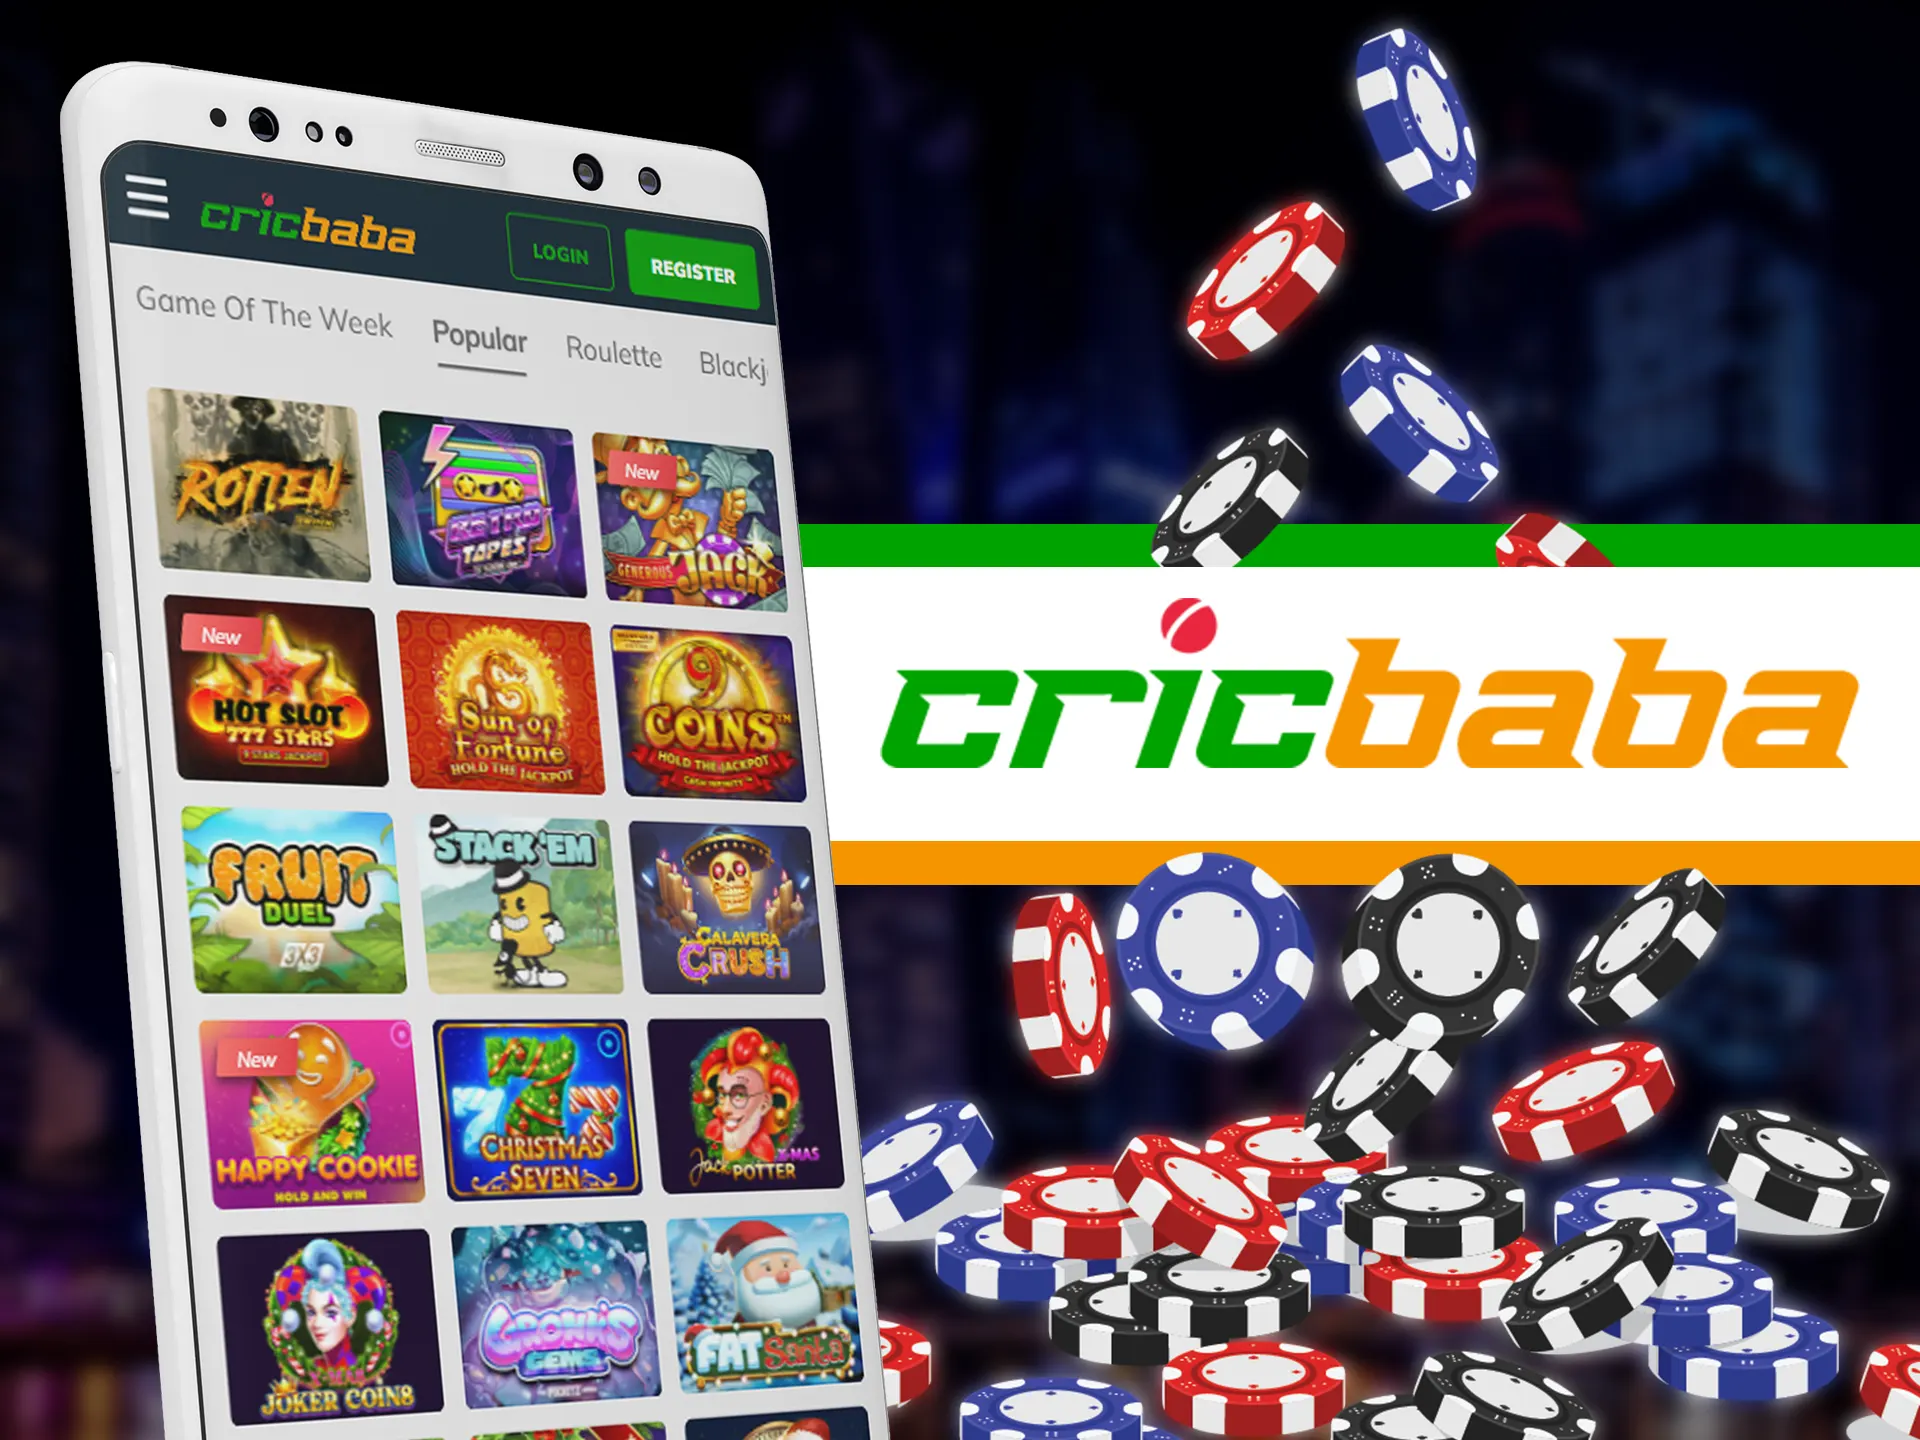 Search for your favourite casino games on casino page.